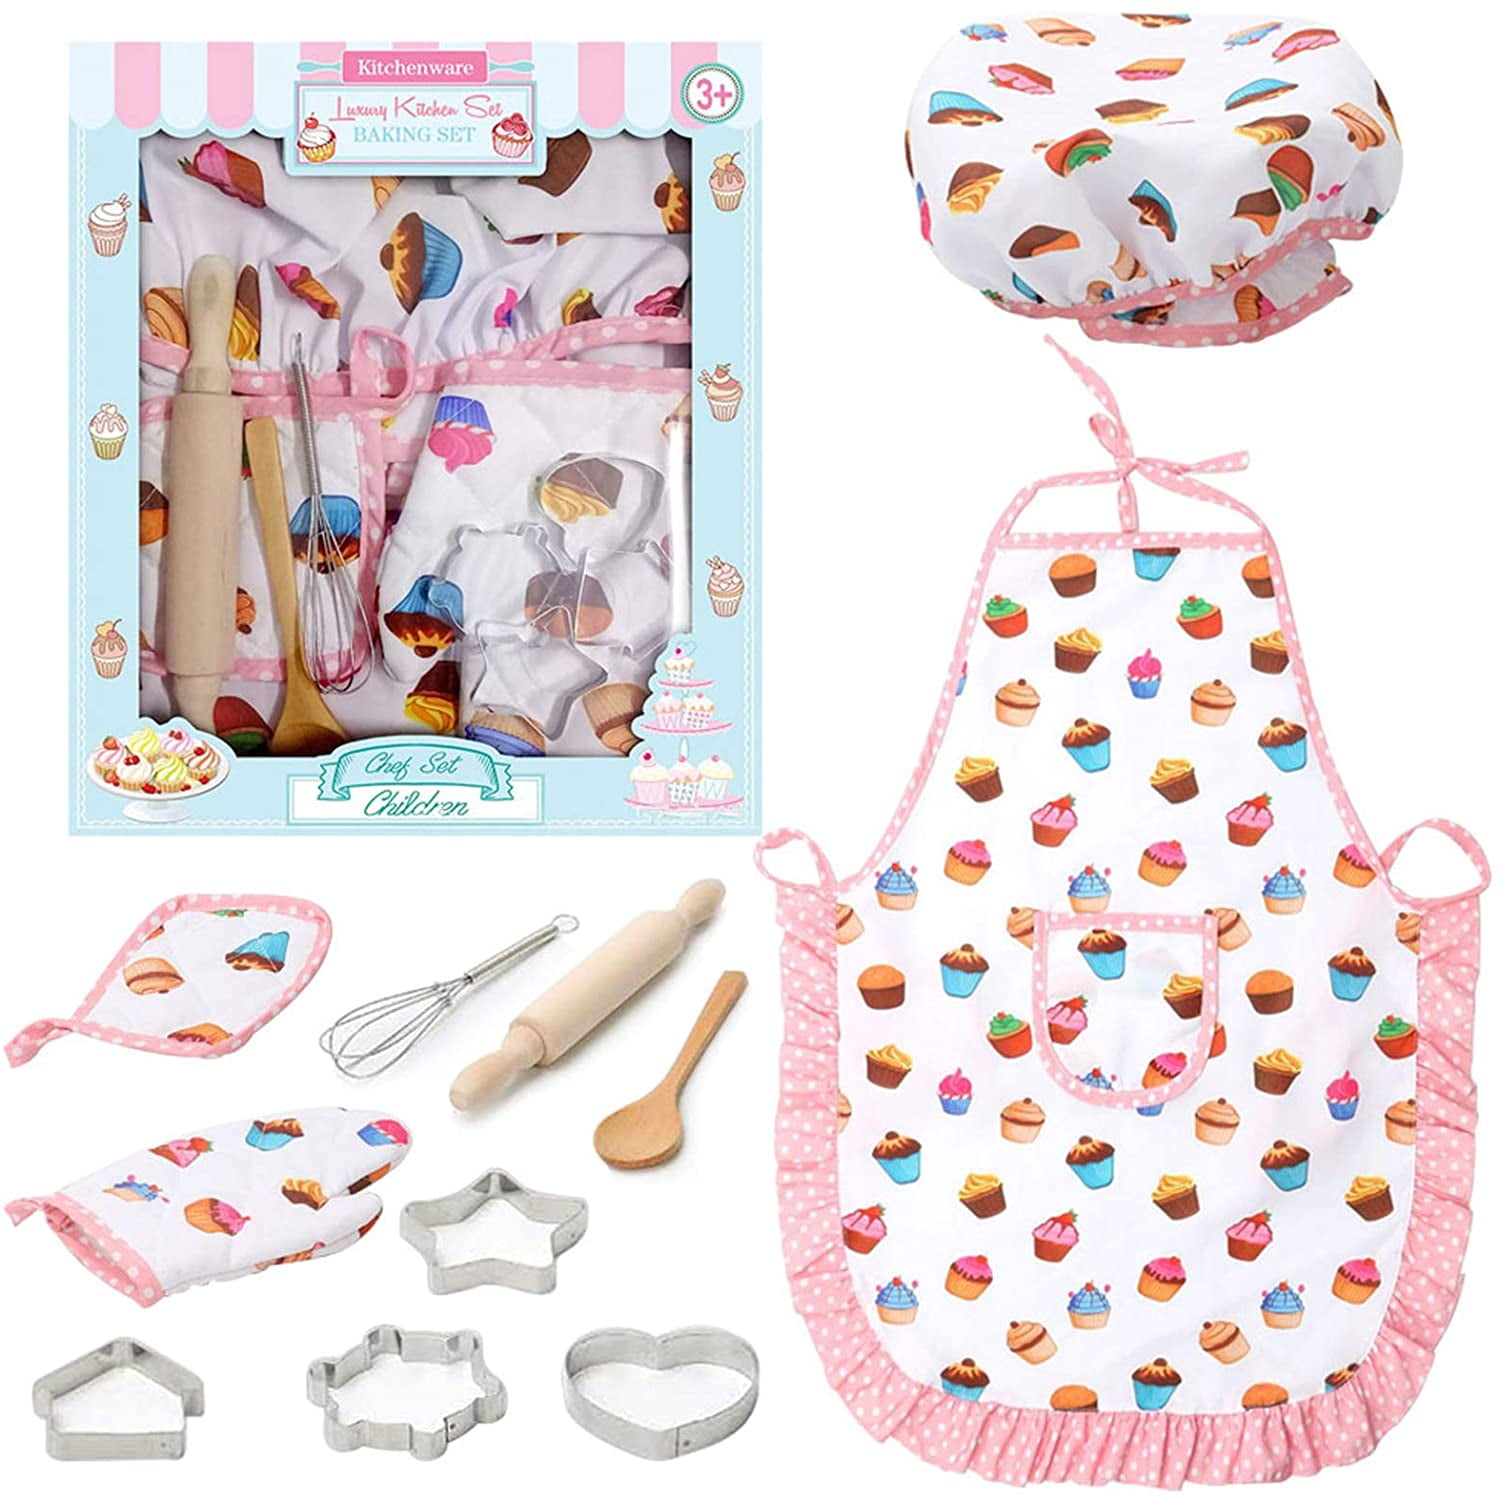 Kids Chef Role Play Costume Set Includes Apron Chef Hat for Little Girls Chef Set Toddler Dress up Pretend Play Kitchen Chef Costume Set-13pcs Baking Sets Great Gift’s for 3 Year Olds Kids and Up 